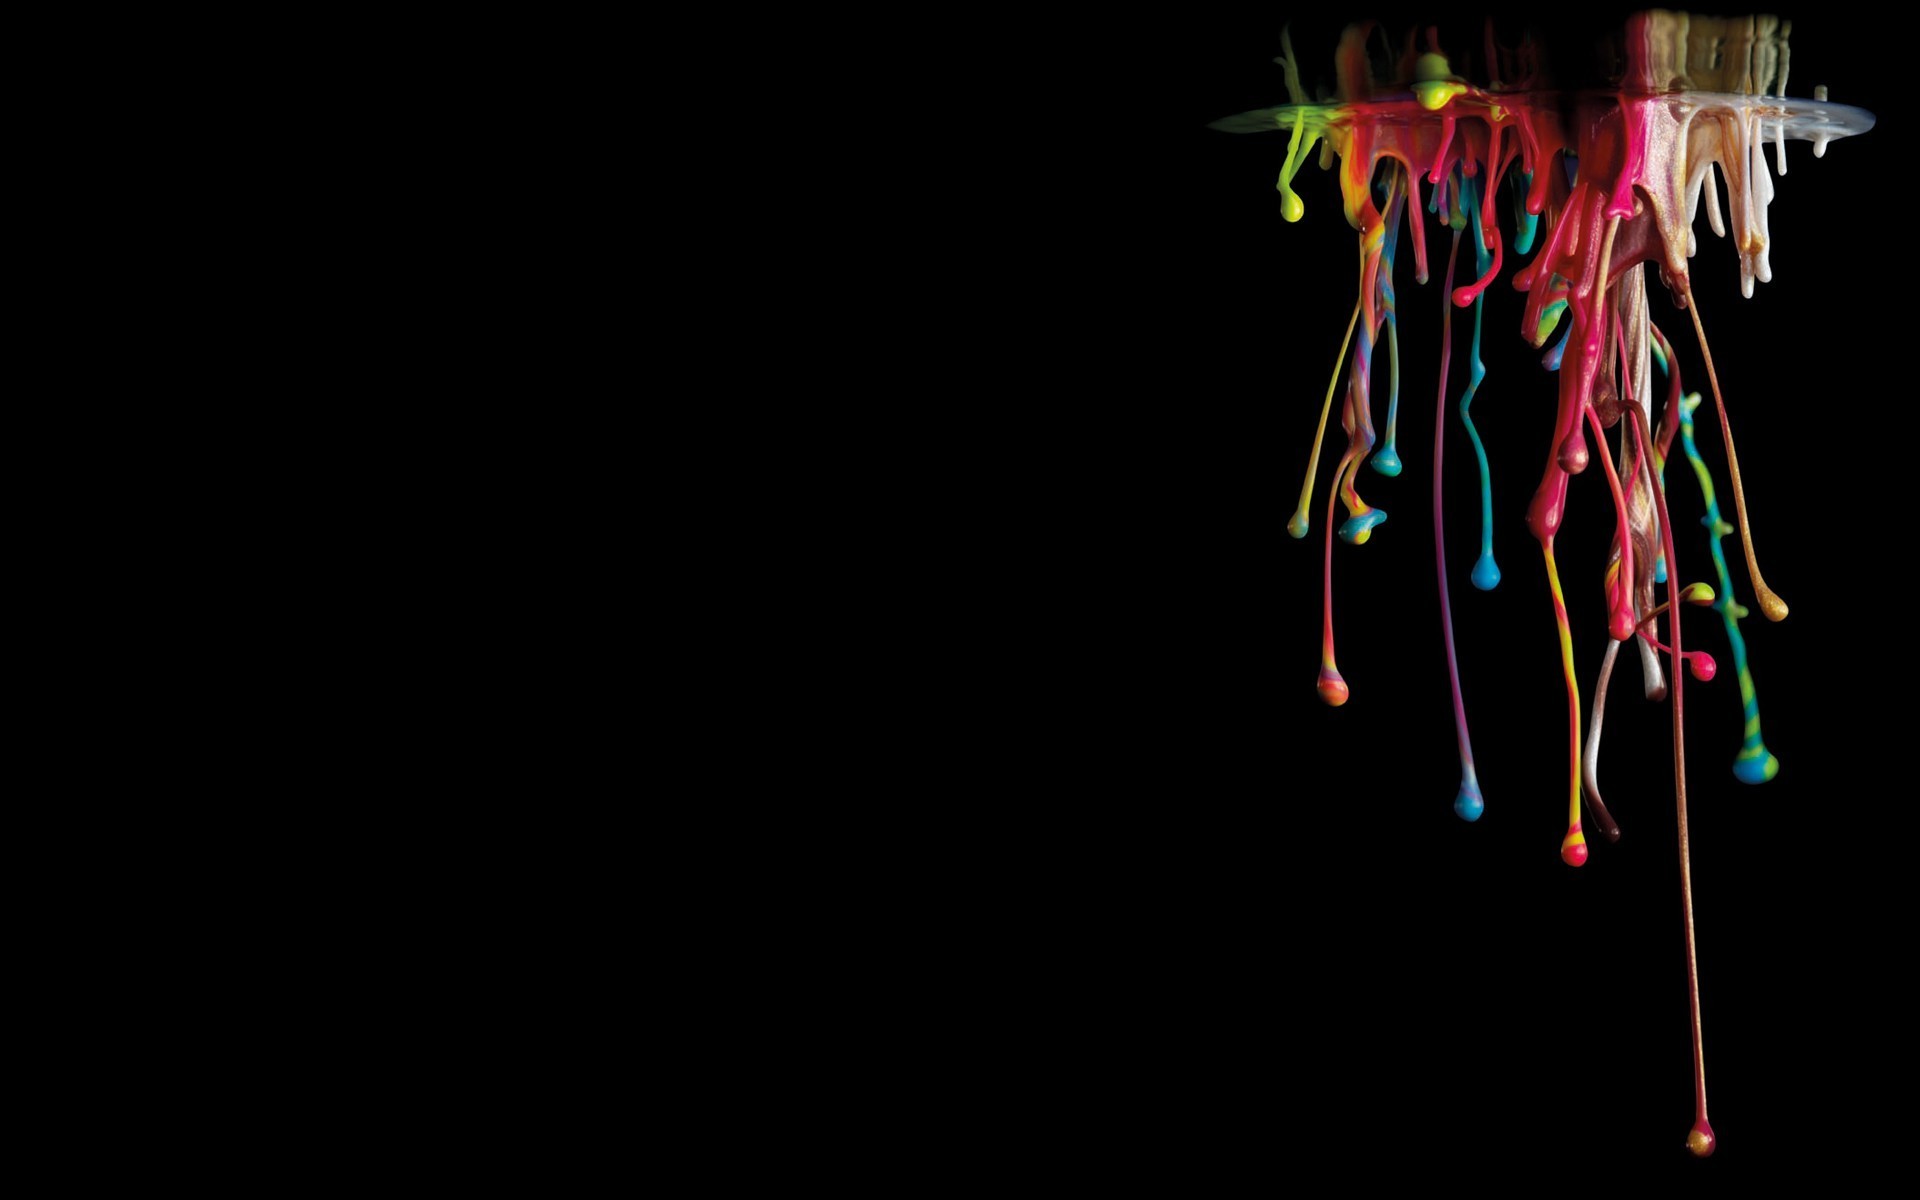 digital Art, Minimalism, Simple Background, Paint Splatter, Colorful, Paint In Water, Reflection